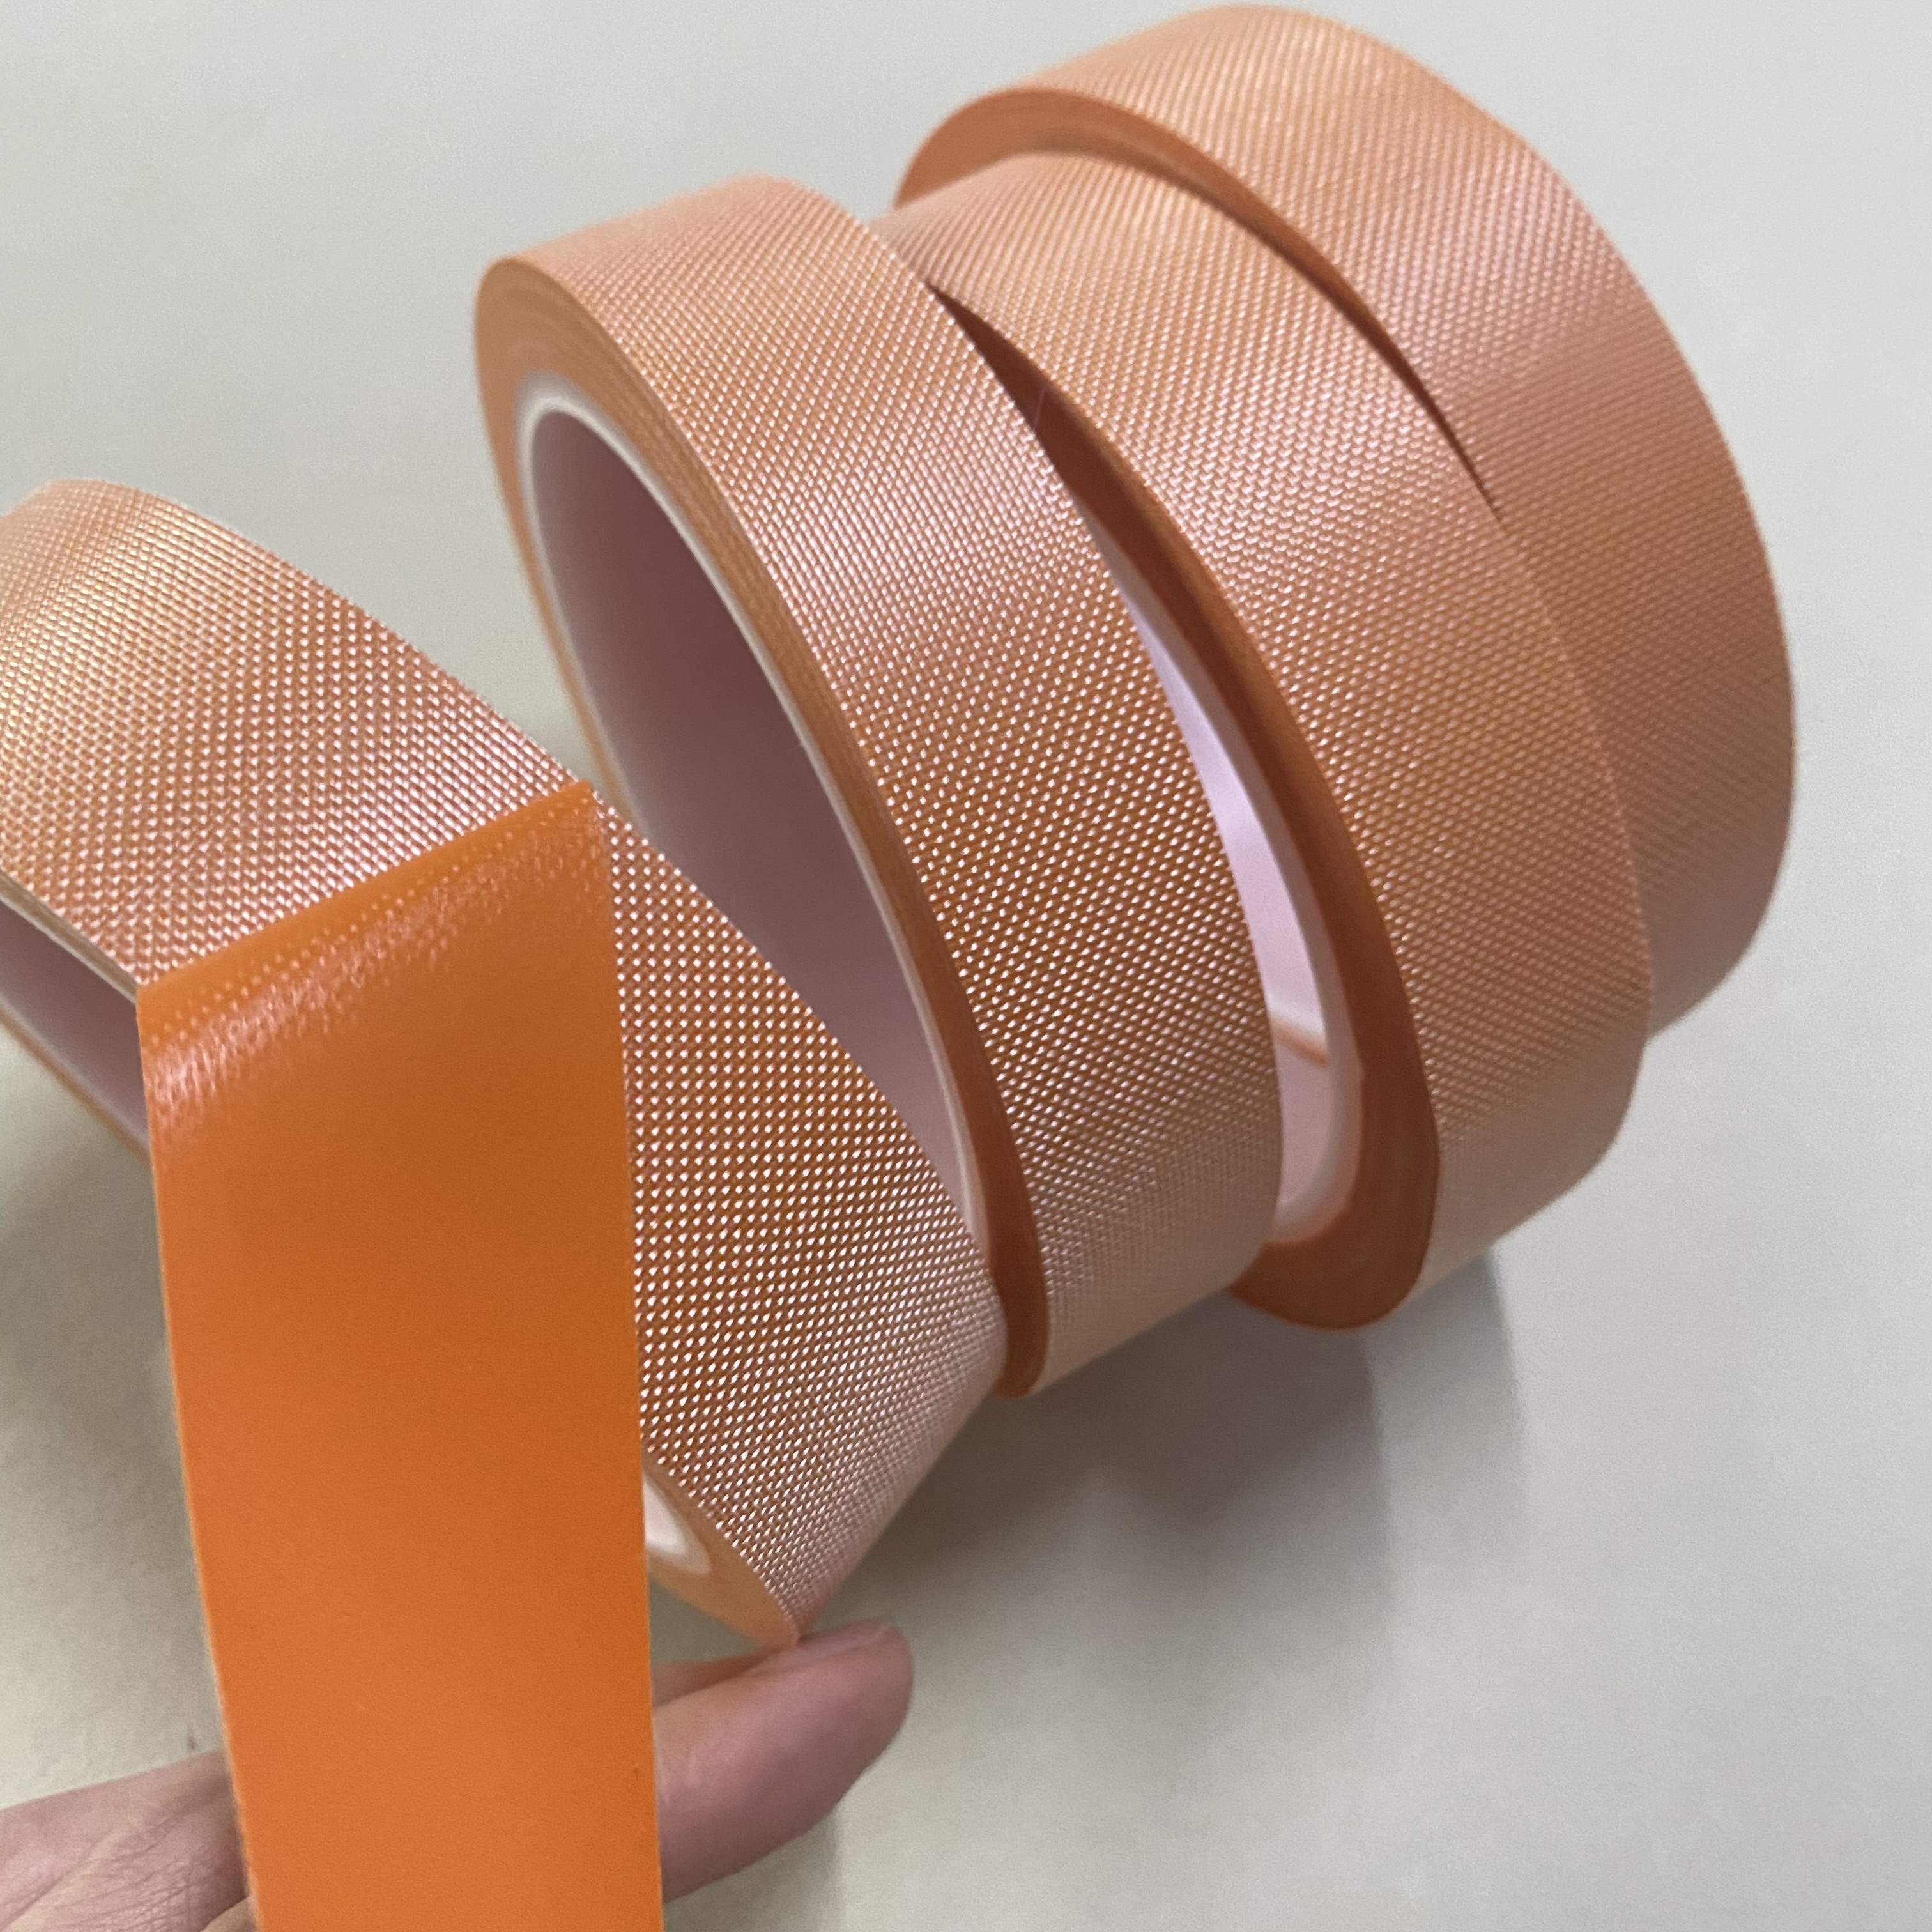  Fireproof Silicone Fiberglass Tape with Adhesive Insulation Heat Resistant Silicone Tape for Wire